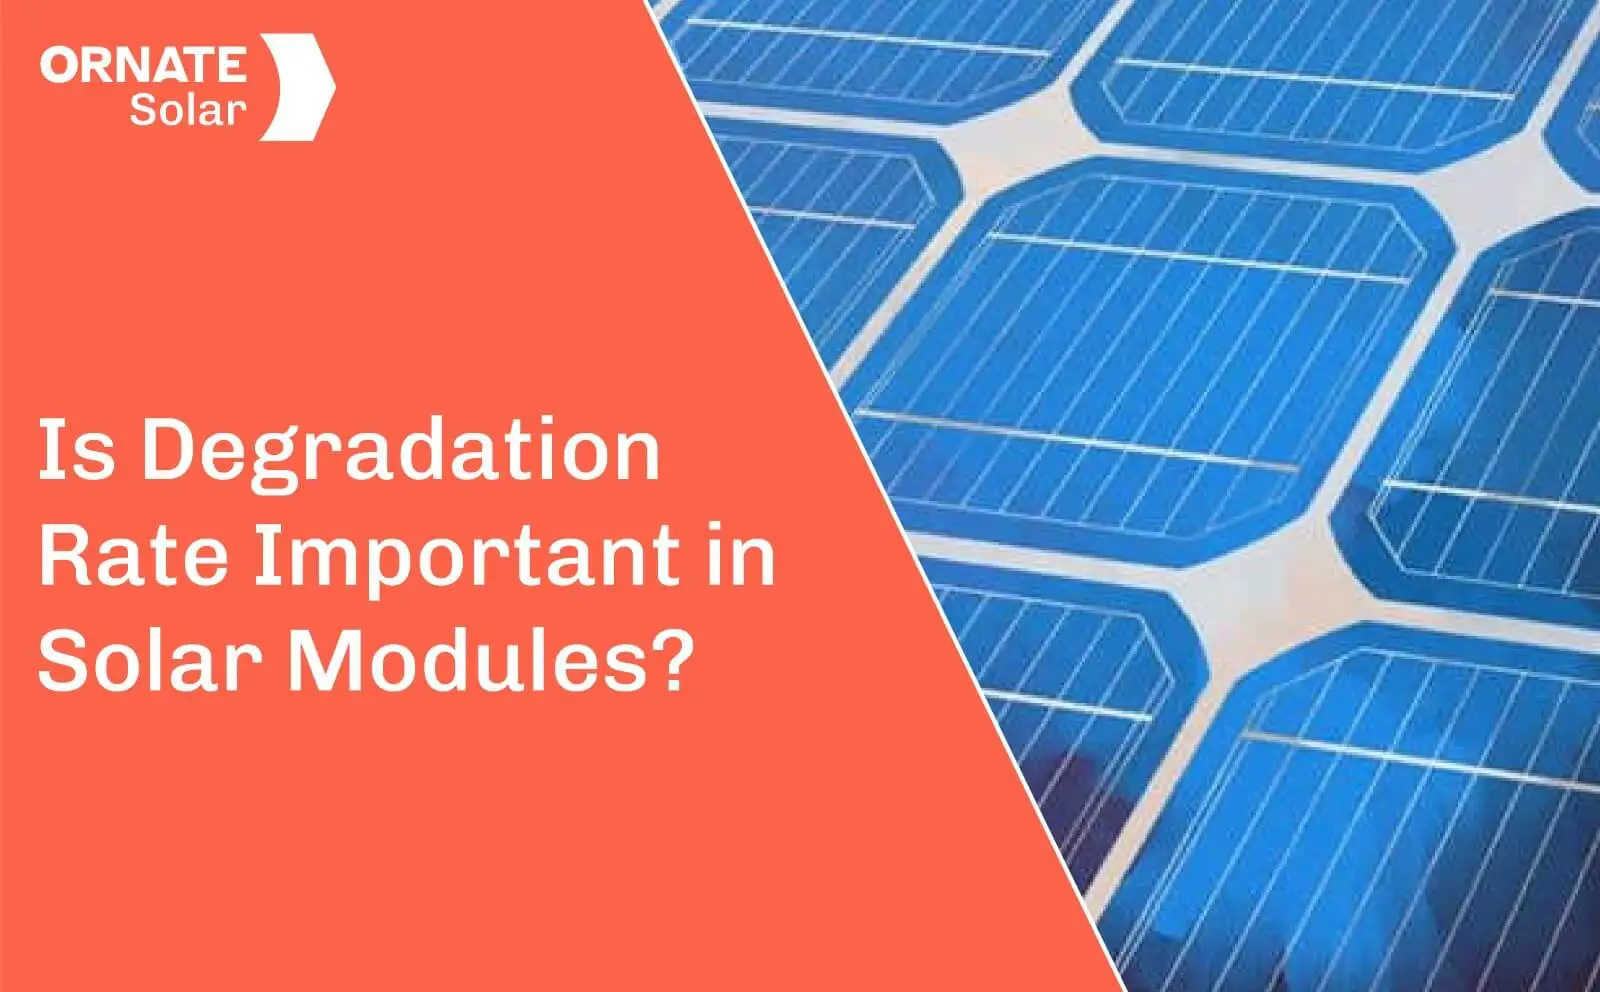 Is Degradation Rate Important in Solar Modules?